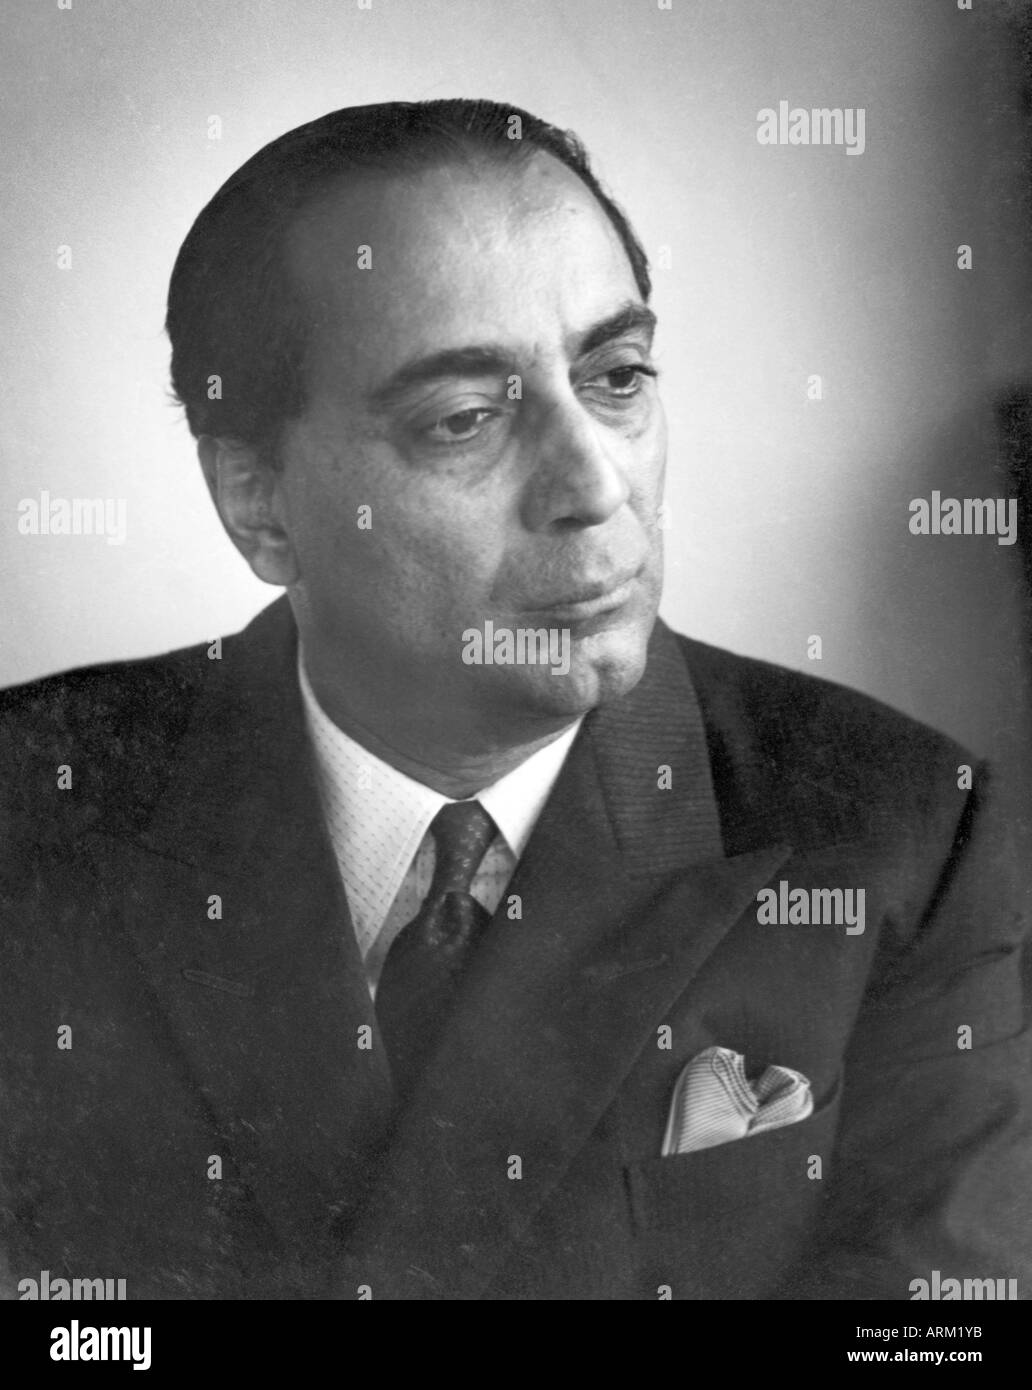 Dr Homi Jehangir Bhabha Indian nuclear physicist, Director, Professor of Physics at TIFRA - Tata Institute of Fundamental Research, India, 1909-1966 Stock Photo